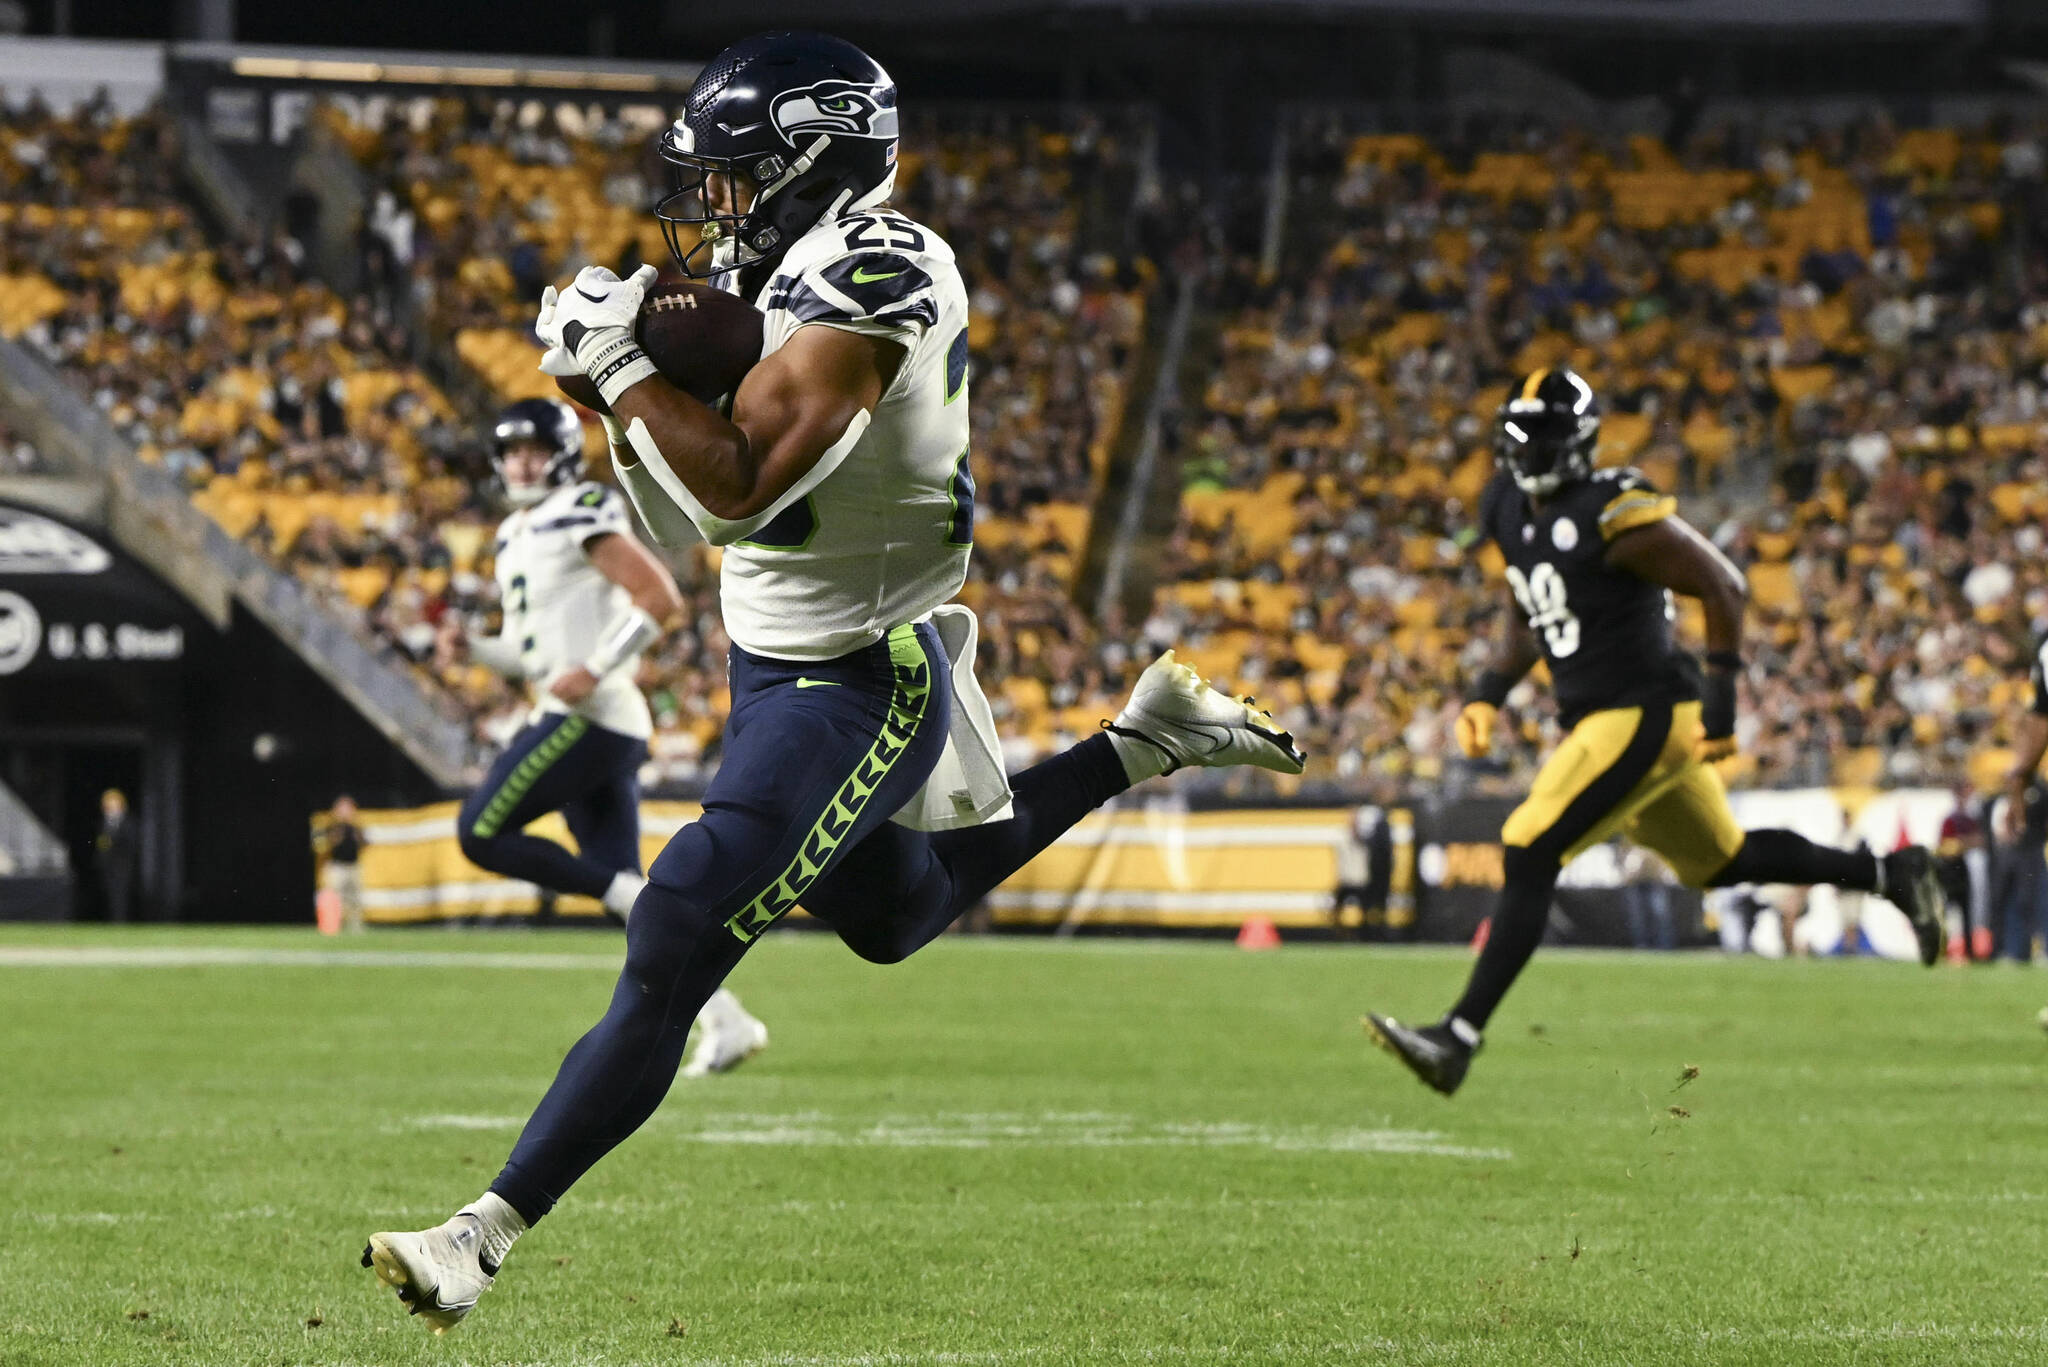 Seattle Seahawks running back Travis Horner (25) makes a catch for a 2-point conversion as Pittsburgh Steelers defensive end DeMarvin Leal (98) pursues during the second half of an NFL preseason football game, Saturday, Aug. 13, 2022, in Pittsburgh. (AP Photo/Barry Reeger)